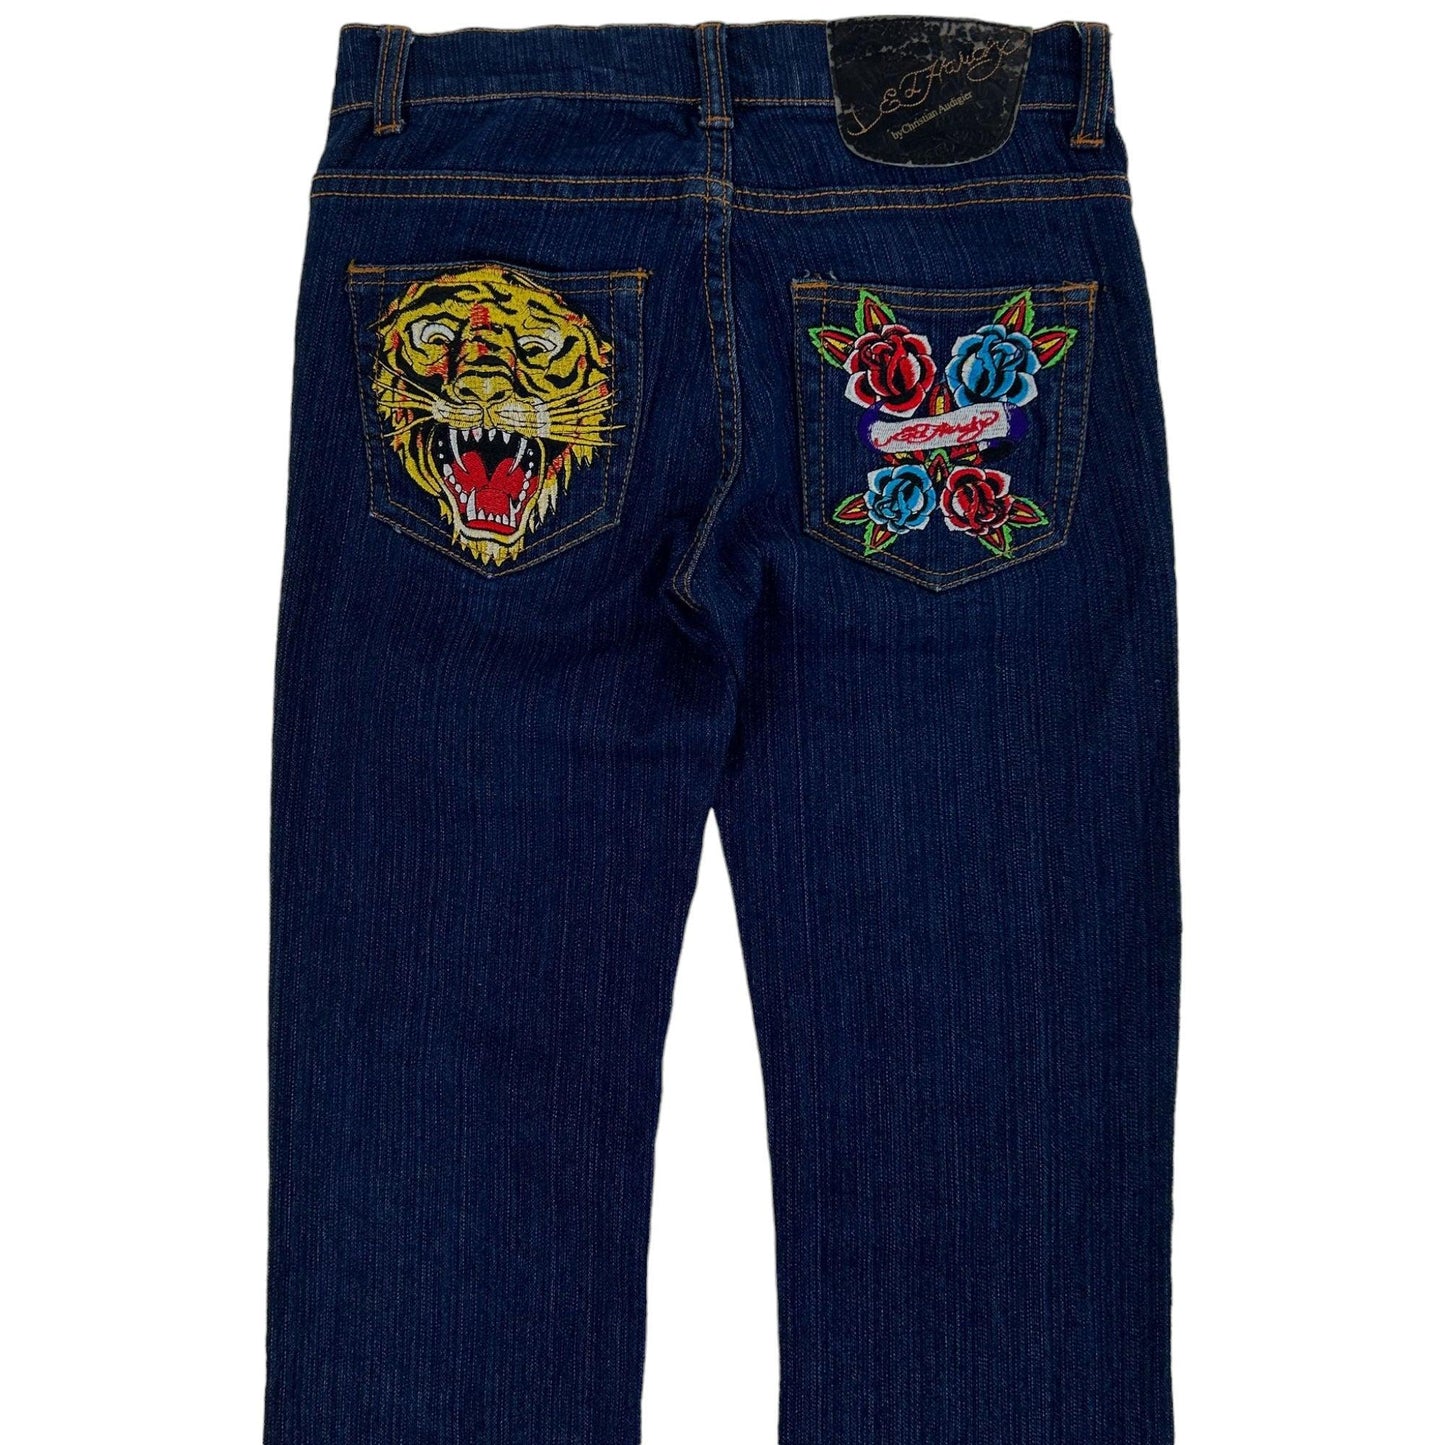 Vintage Ed Hardy Embroidered Low Rise Jeans Women's Size W28 - Known Source